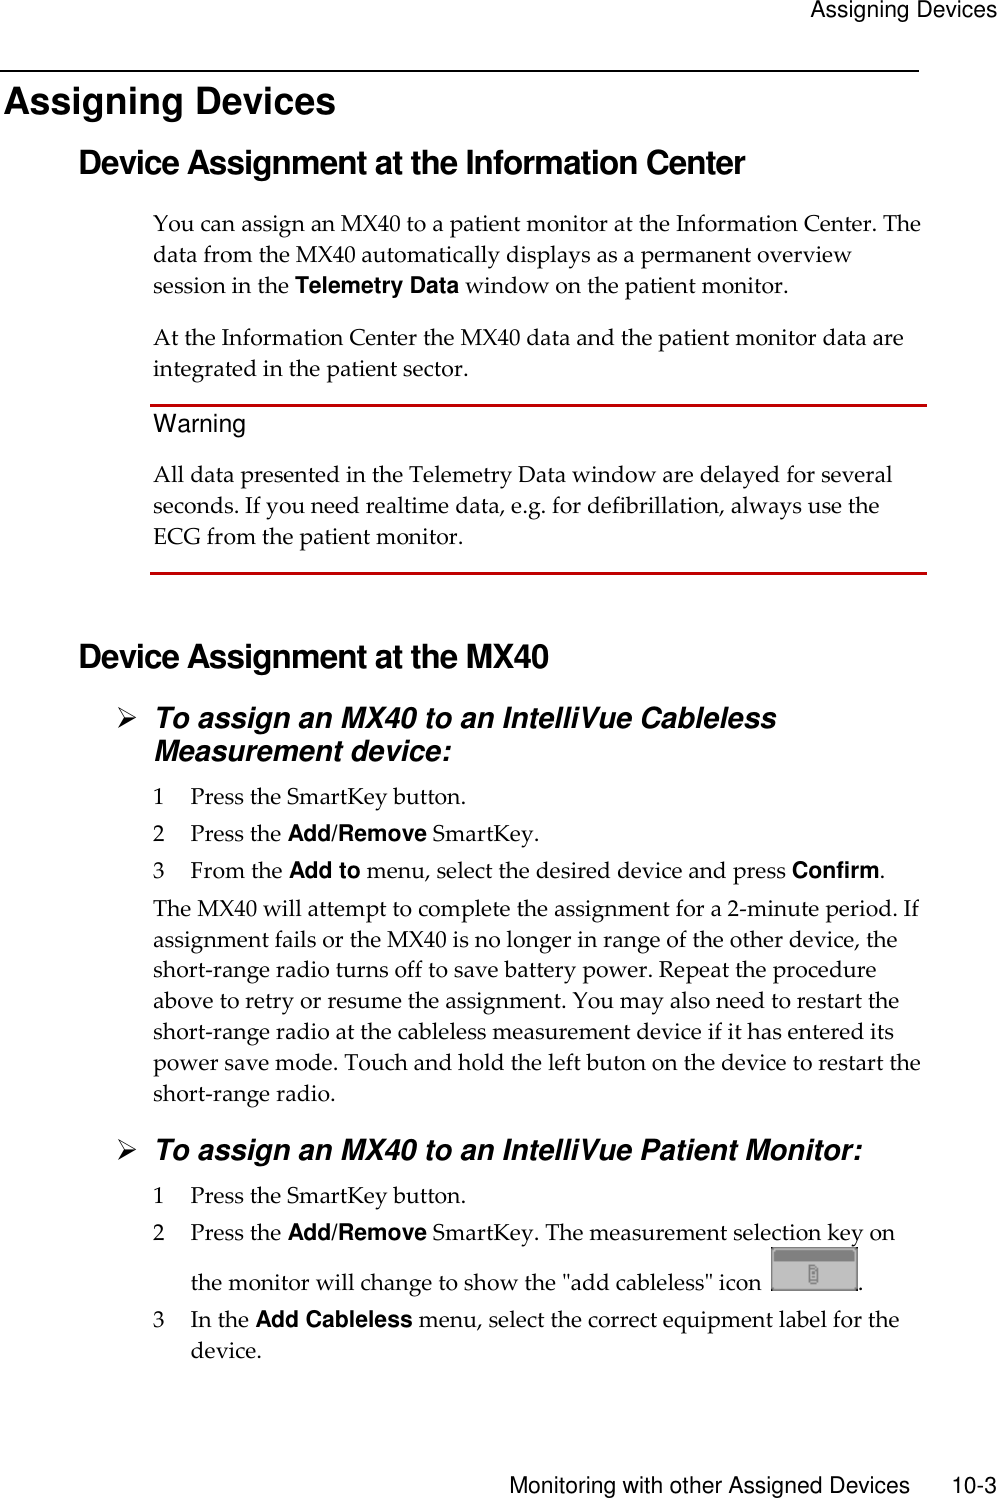     Assigning Devices       Monitoring with other Assigned Devices        10-3 Assigning Devices Device Assignment at the Information Center You can assign an MX40 to a patient monitor at the Information Center. The data from the MX40 automatically displays as a permanent overview session in the Telemetry Data window on the patient monitor.   At the Information Center the MX40 data and the patient monitor data are integrated in the patient sector.   Warning All data presented in the Telemetry Data window are delayed for several seconds. If you need realtime data, e.g. for defibrillation, always use the ECG from the patient monitor.   Device Assignment at the MX40  To assign an MX40 to an IntelliVue Cableless Measurement device: 1 Press the SmartKey button. 2 Press the Add/Remove SmartKey. 3 From the Add to menu, select the desired device and press Confirm. The MX40 will attempt to complete the assignment for a 2-minute period. If assignment fails or the MX40 is no longer in range of the other device, the short-range radio turns off to save battery power. Repeat the procedure above to retry or resume the assignment. You may also need to restart the short-range radio at the cableless measurement device if it has entered its power save mode. Touch and hold the left buton on the device to restart the short-range radio.  To assign an MX40 to an IntelliVue Patient Monitor: 1 Press the SmartKey button. 2 Press the Add/Remove SmartKey. The measurement selection key on the monitor will change to show the &quot;add cableless&quot; icon  . 3 In the Add Cableless menu, select the correct equipment label for the device. 